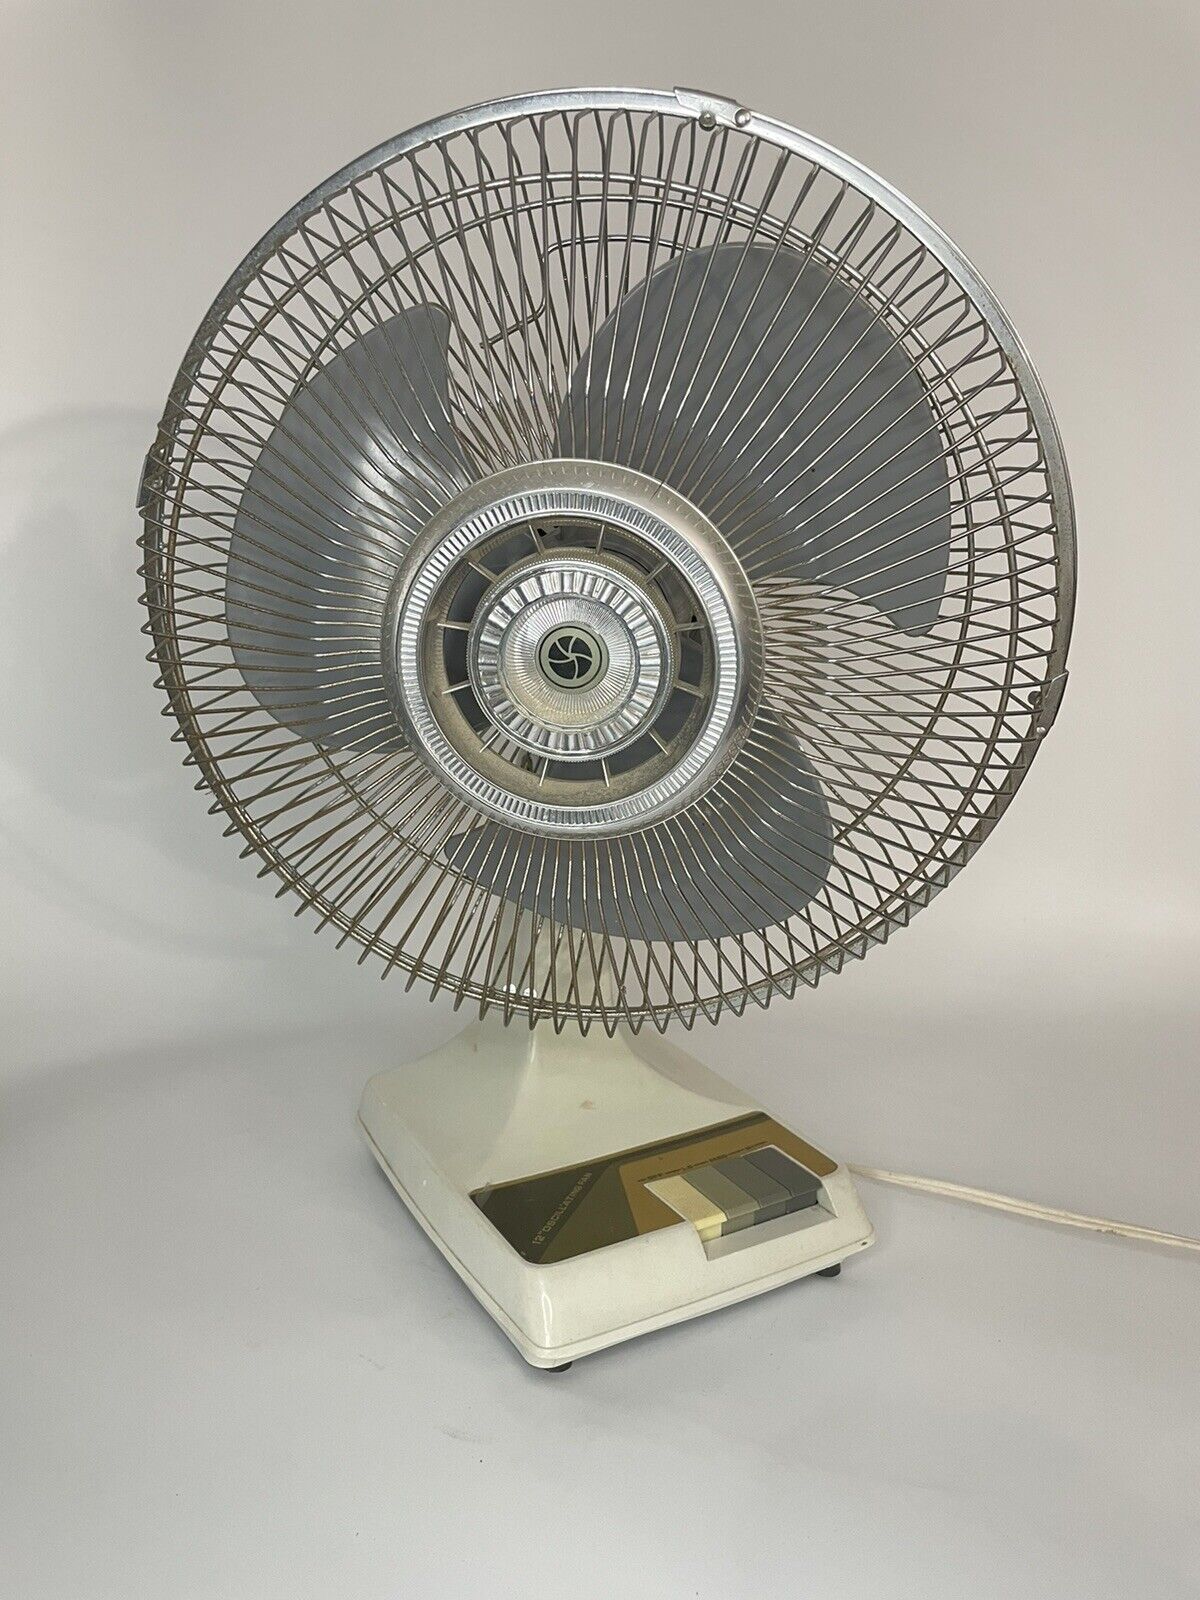 Vintage Kuo Horn Desk Table Oscillating 12 Inch 3 Speed Fan KH-203-BL, Works